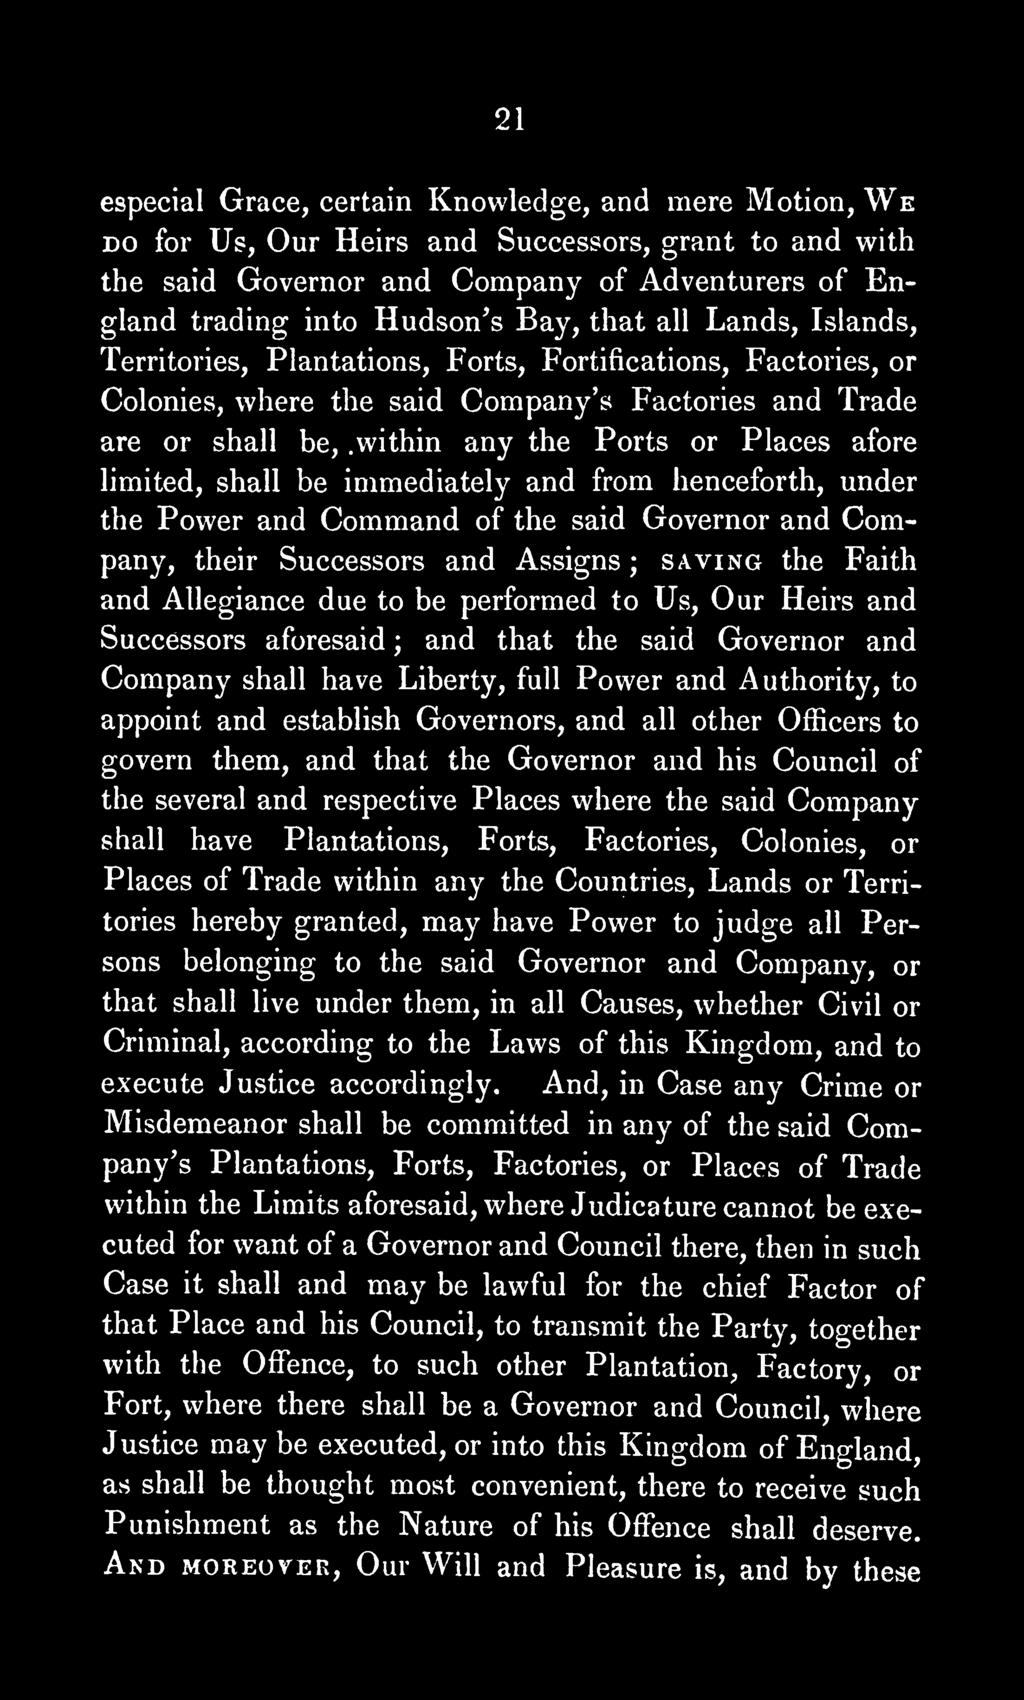 within any the Ports or Places afore limited, shall be immediately and from henceforth, under the Power and Command of the said Governor and Company, their Successors and Assigns ; saving the Faith